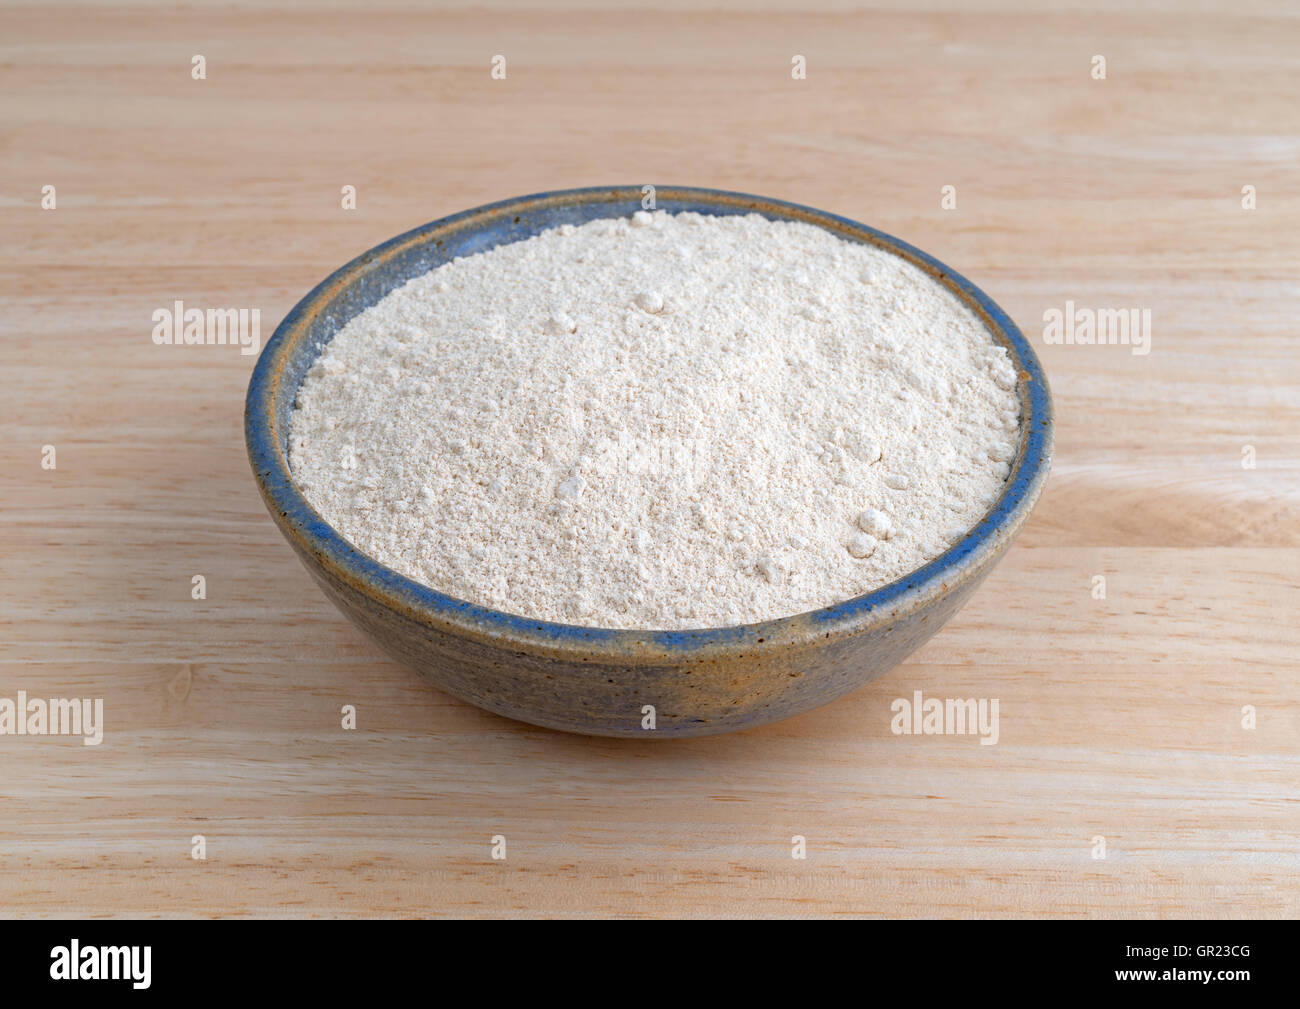 A bowl filled with quinoa flour on a wood table. Stock Photo